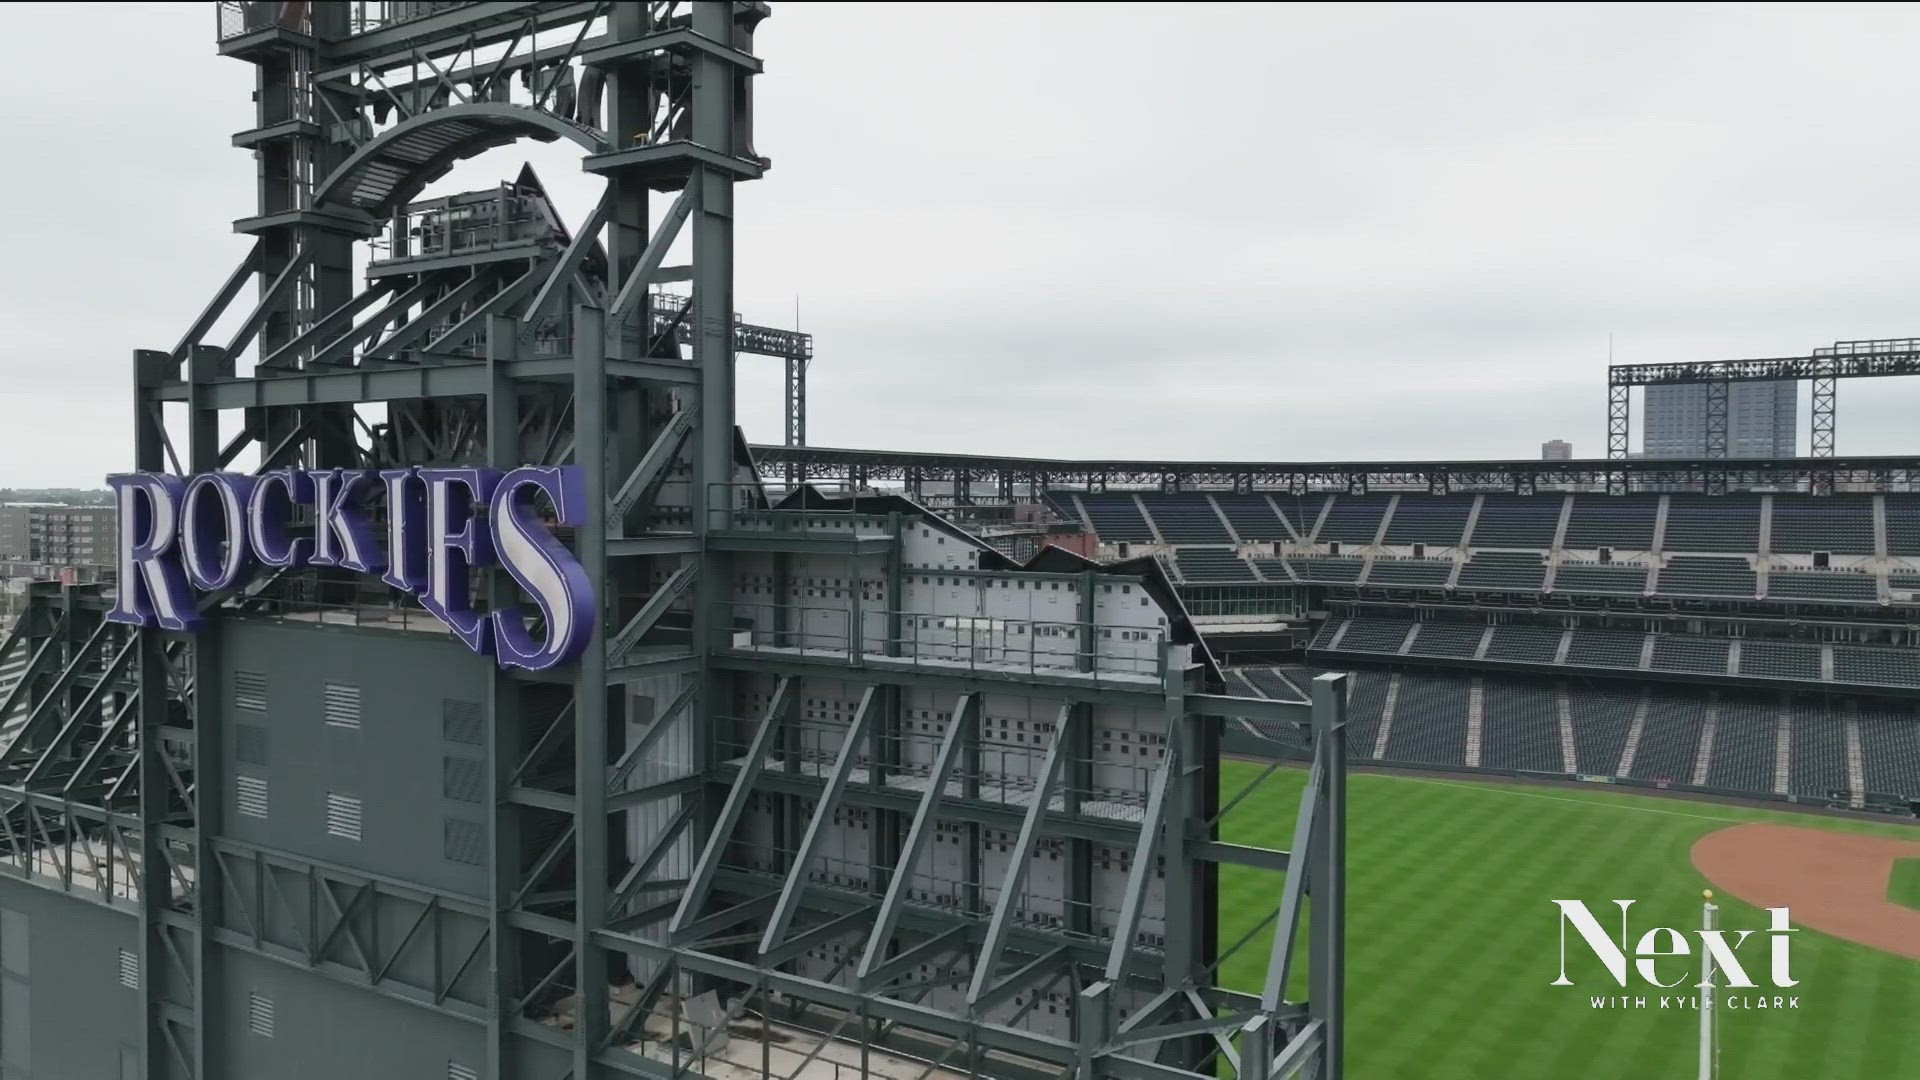 On this day, Major League Baseball announced the Colorado Rockies would be coming to Denver.